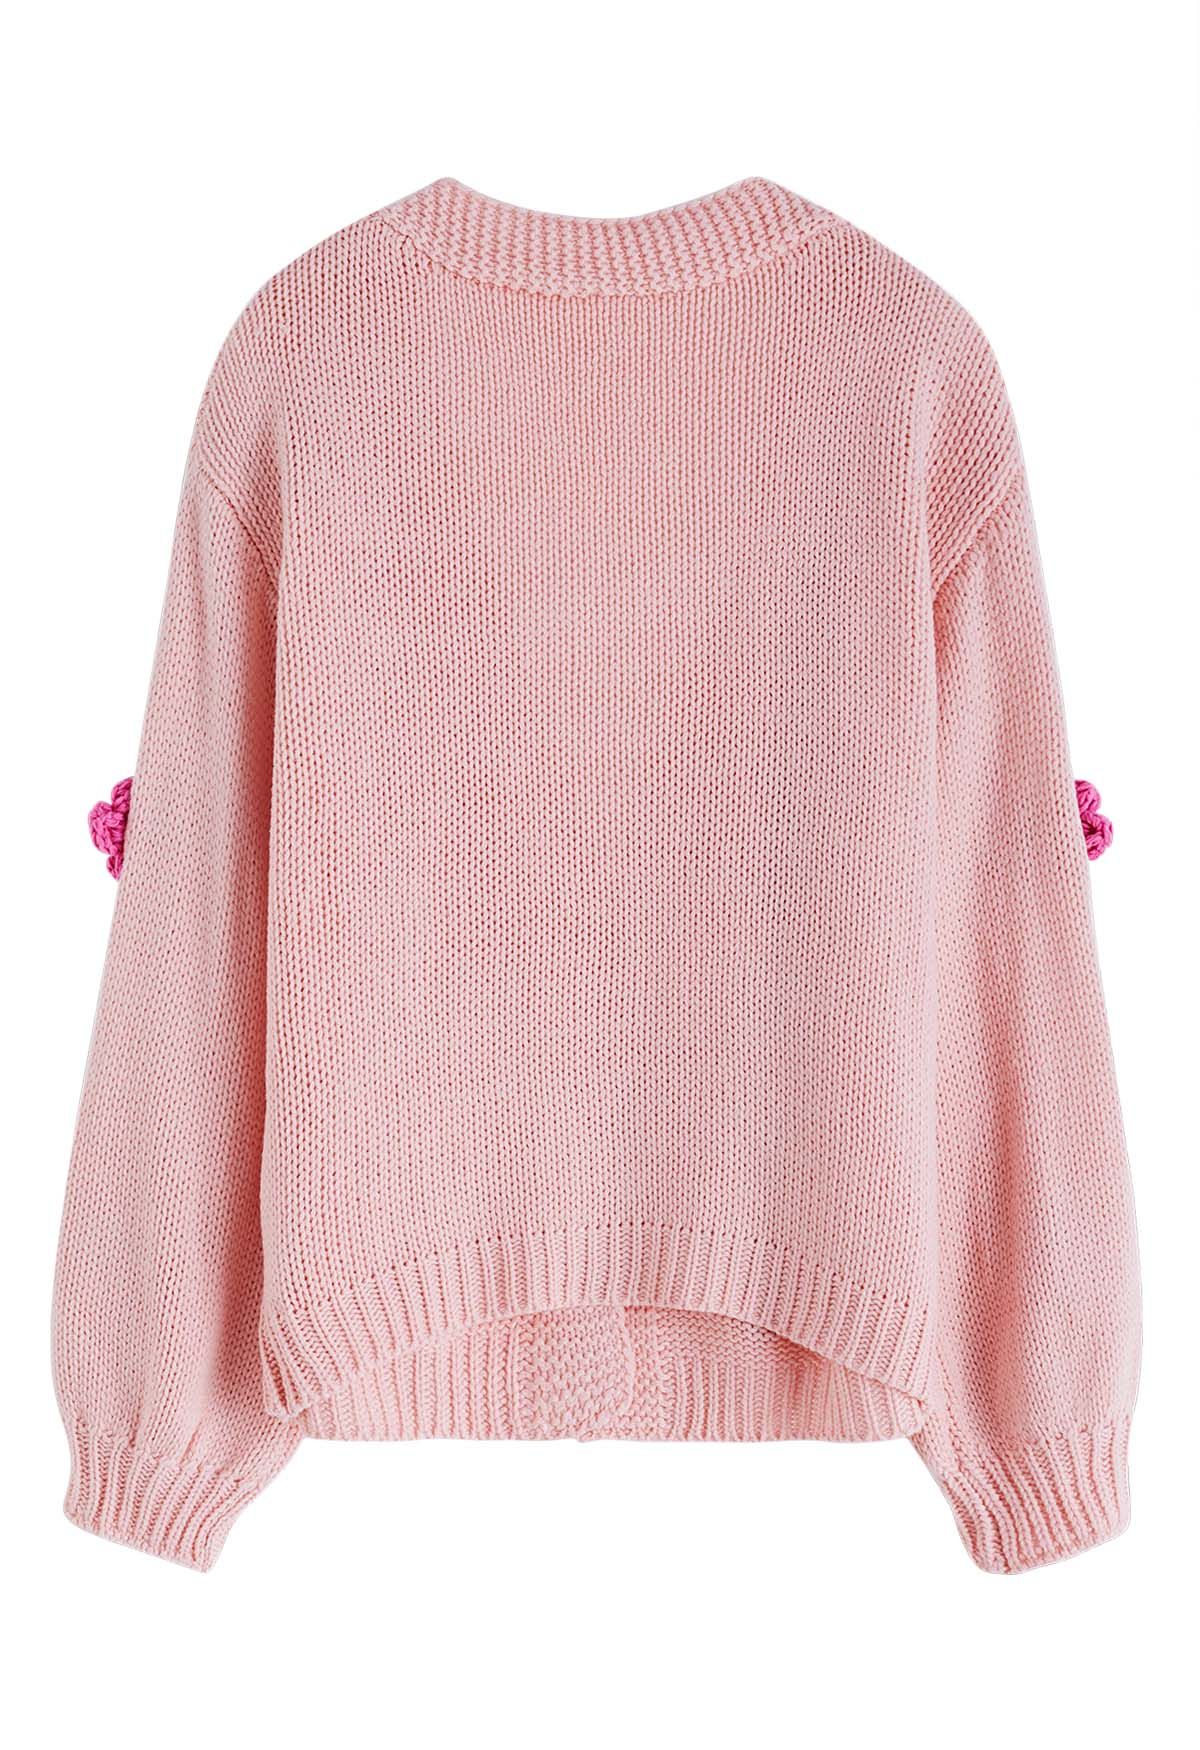 3D Stitch Flower Open Front Knit Cardigan in Pink